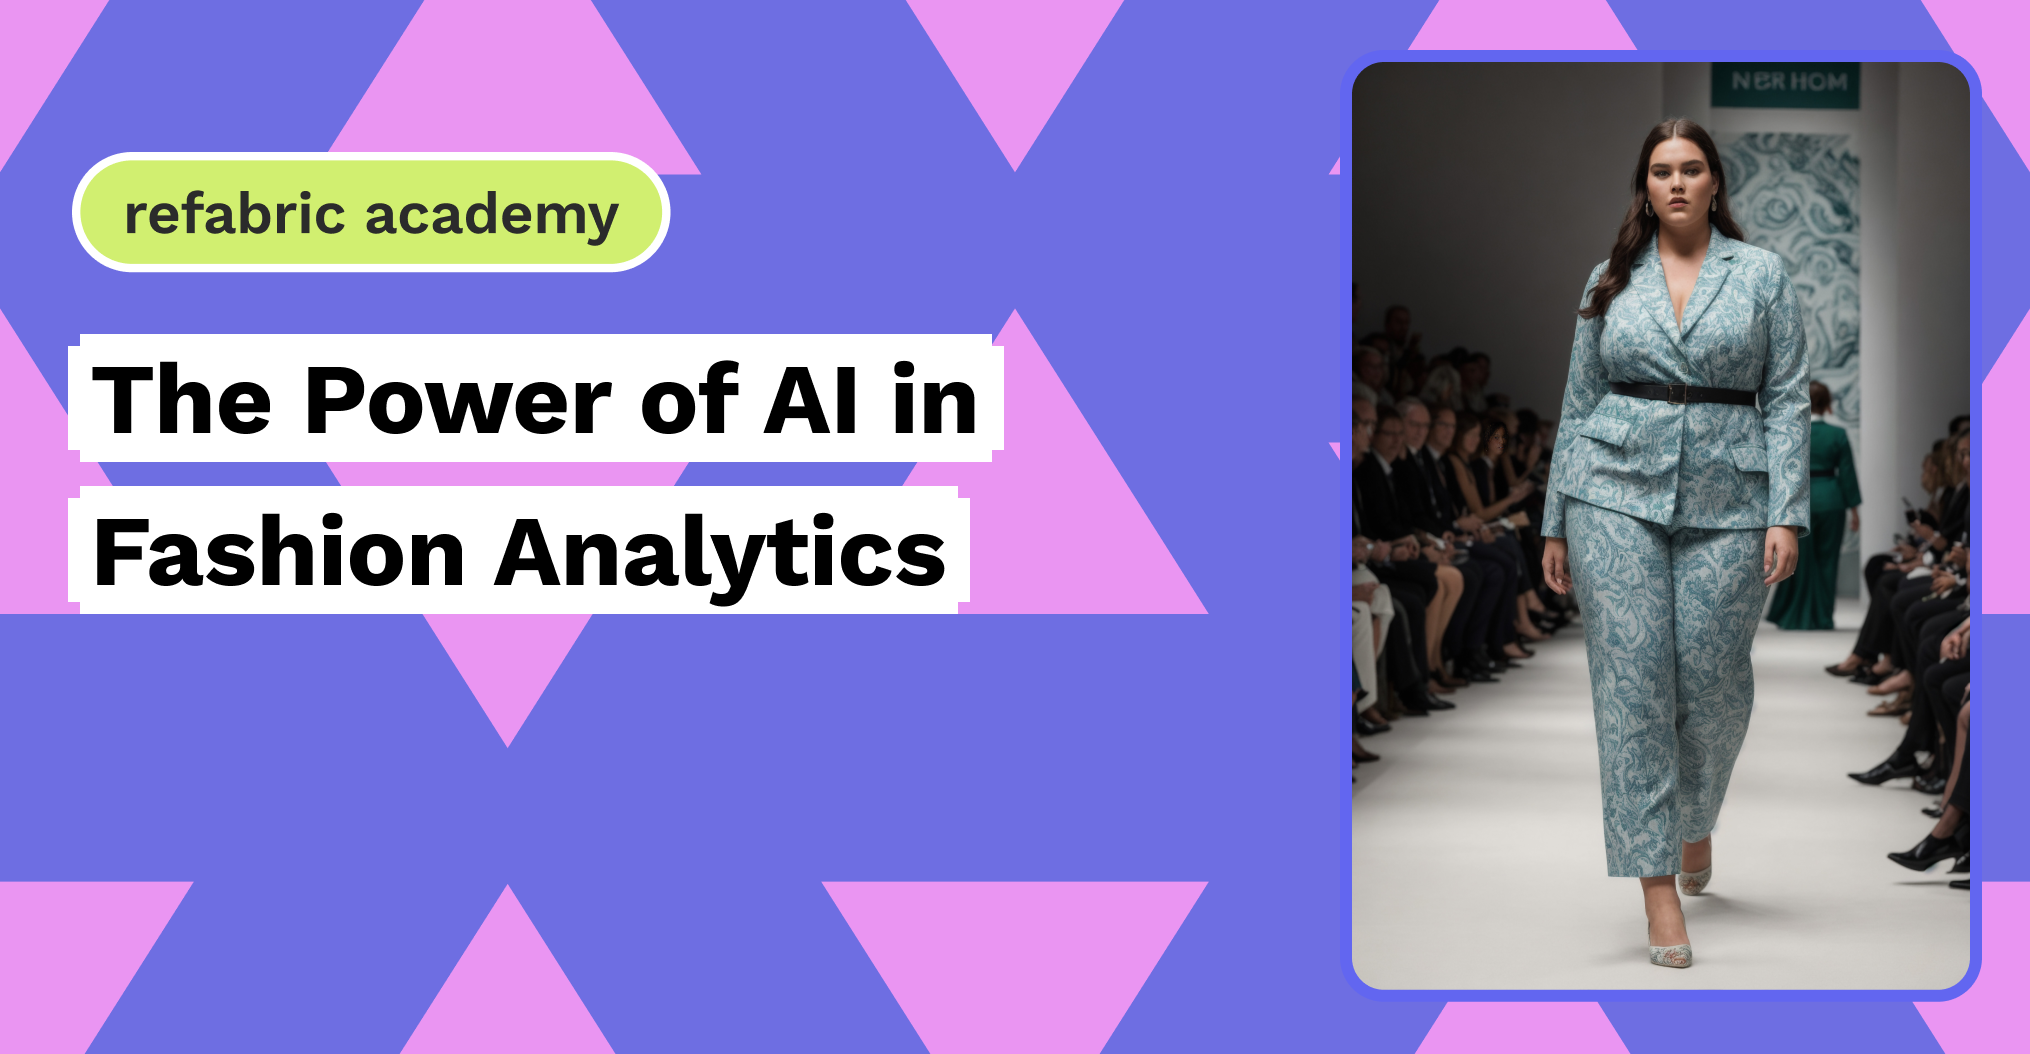 The Power of AI in Fashion Analytics - Refabric